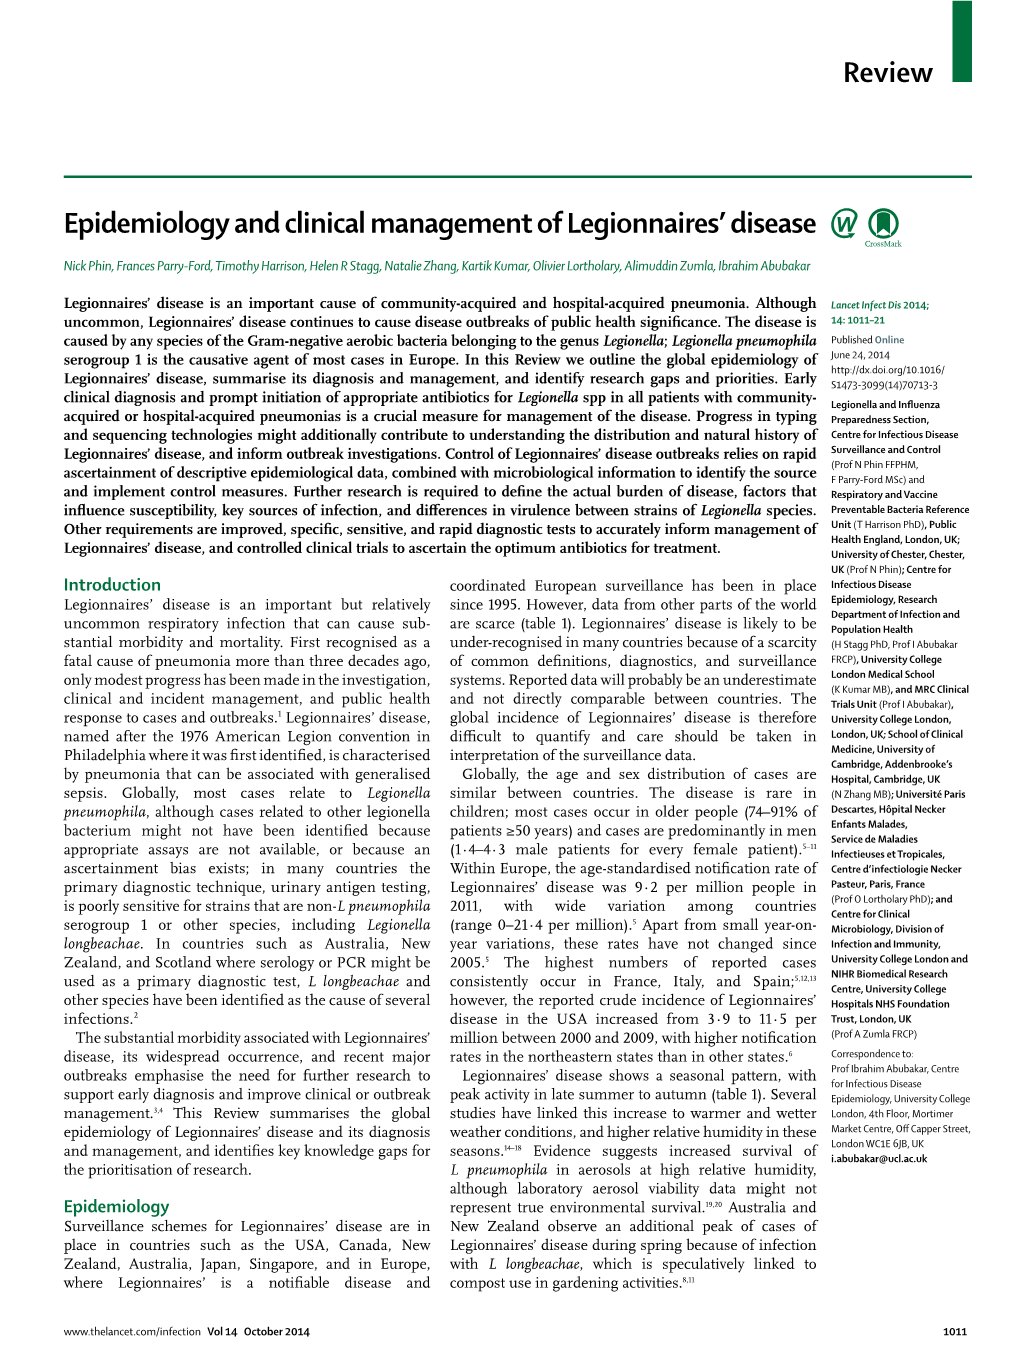 Review Epidemiology and Clinical Management of Legionnaires